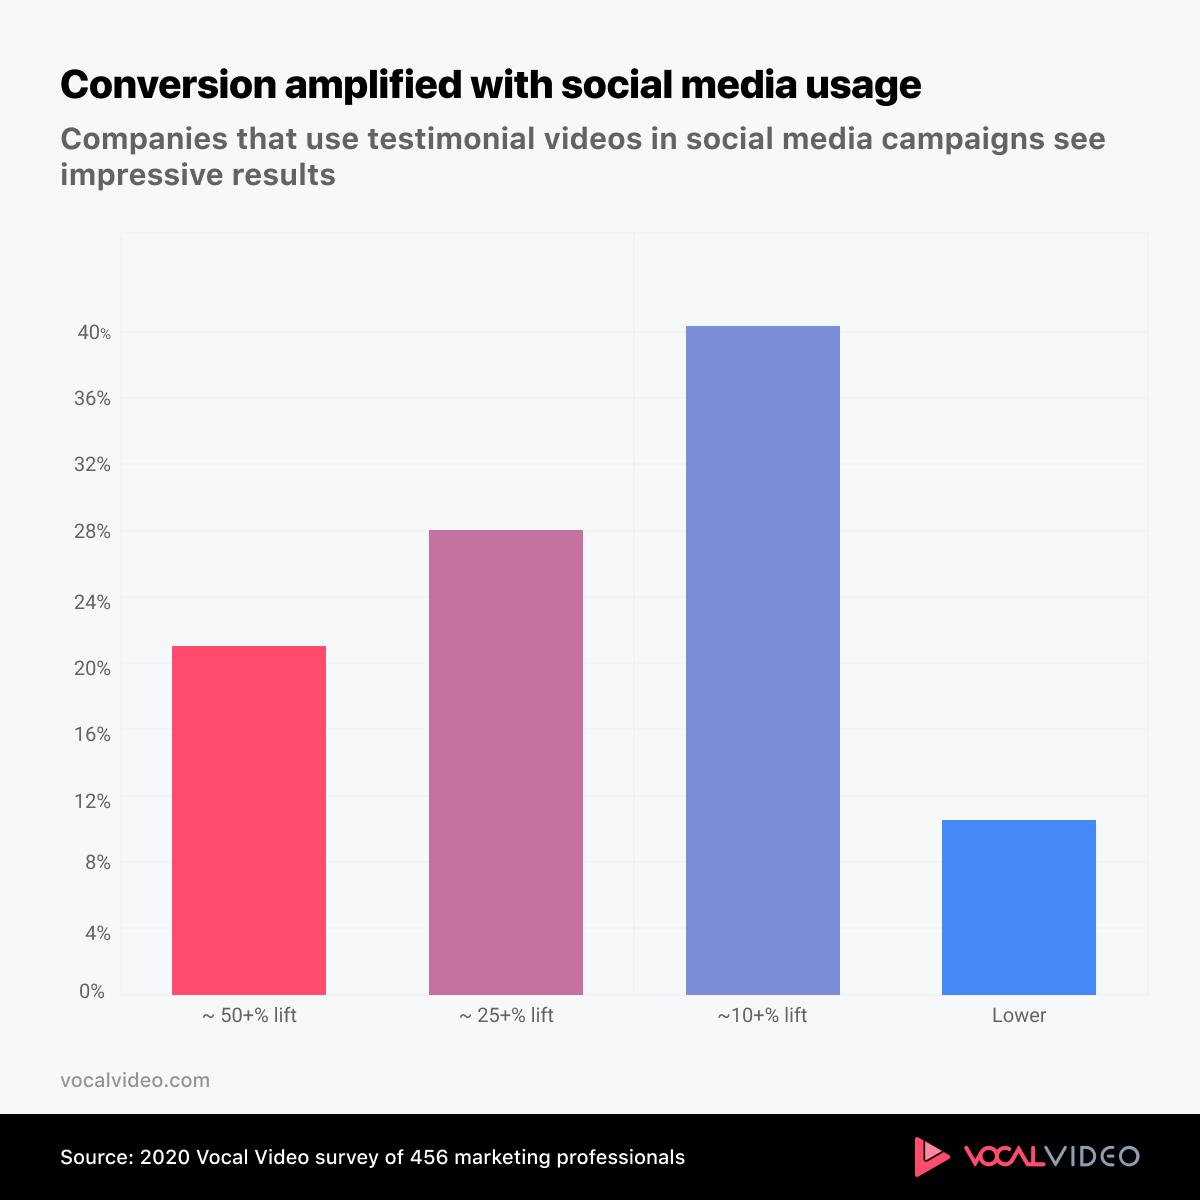 Conversion amplified with social media usage. 